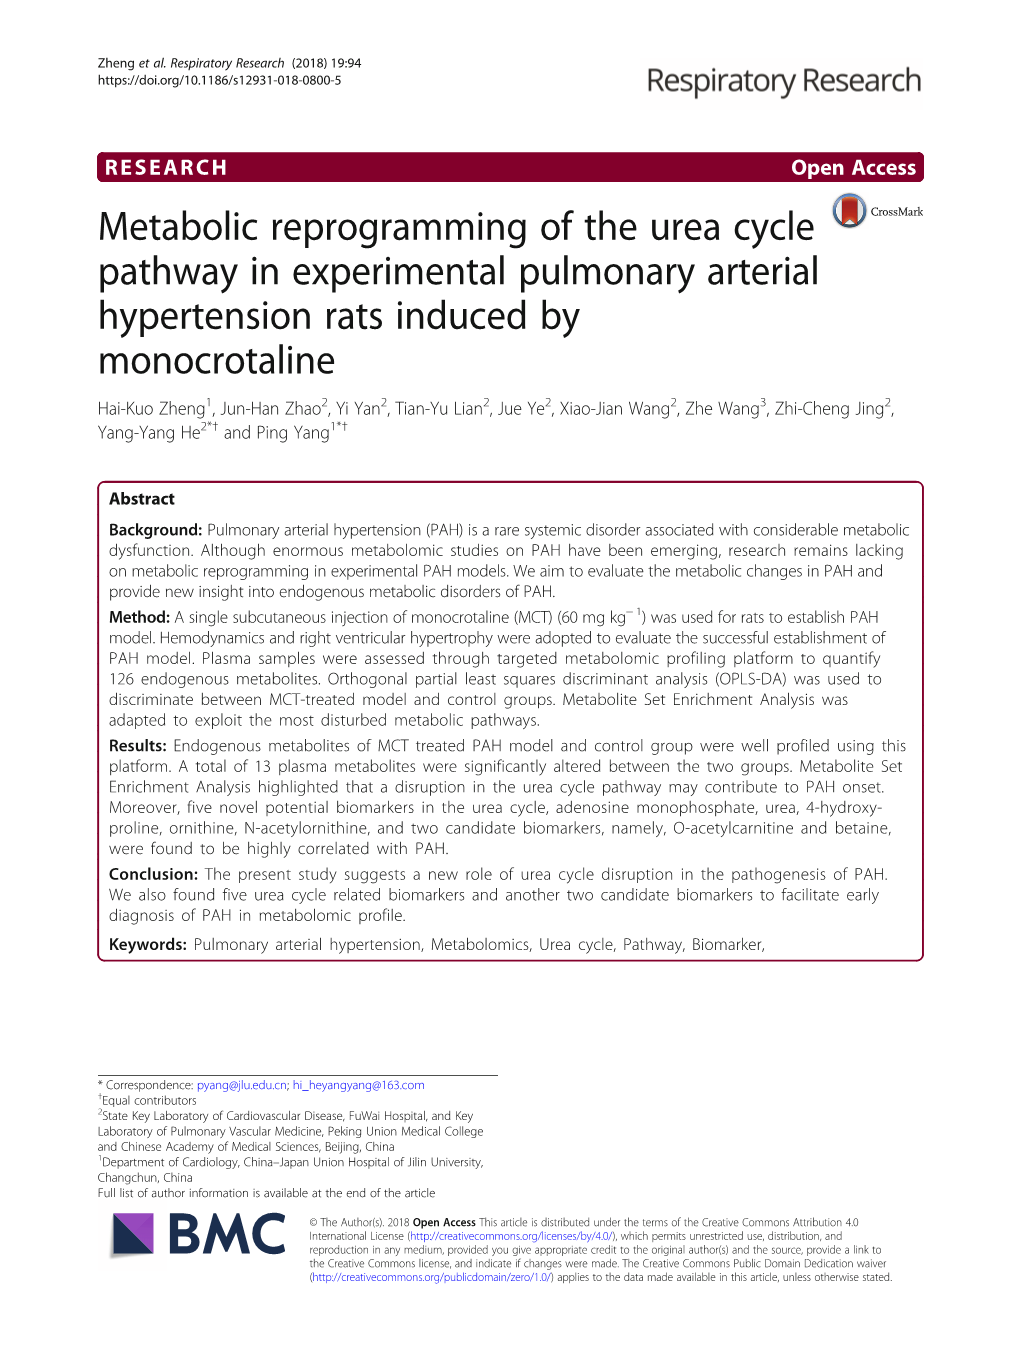 Metabolic Reprogramming of the Urea Cycle Pathway in Experimental Pulmonary Arterial Hypertension Rats Induced by Monocrotaline